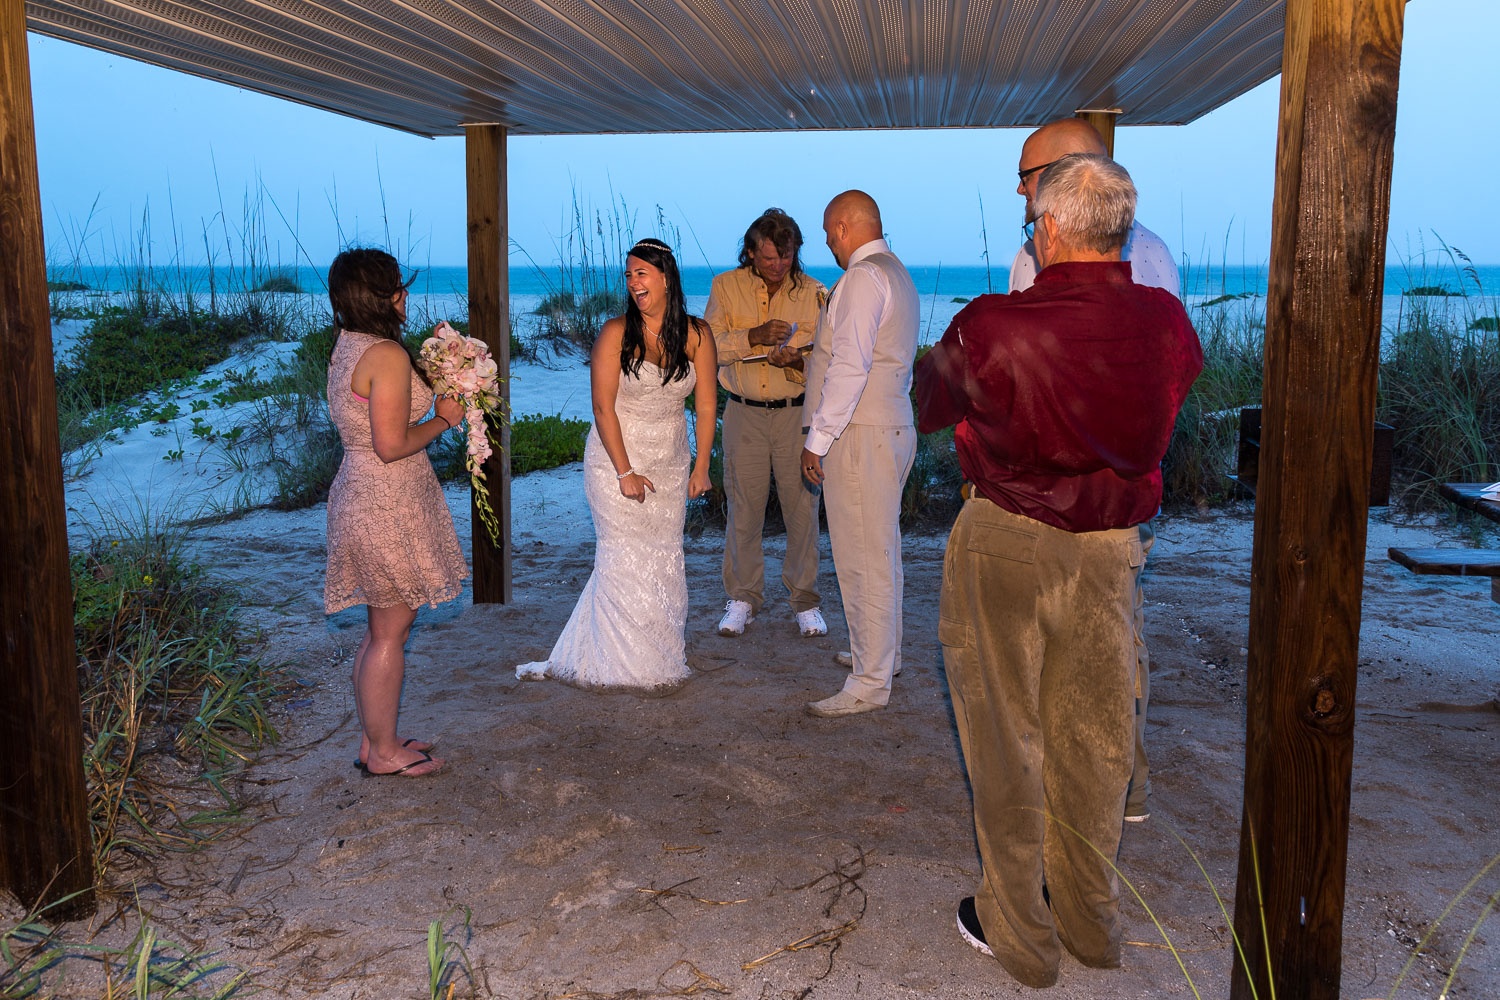   Steve McCarthy Photography: Premier SWFL Wedding Photographer serving all of SWFL,  from Tampa to Naples, Fort Myers Beach, Pine Island, Sanibel, Captiva and Marco Island and over to Miami and up to Delray Beach, including: Tampa, Sarasota, Venice,